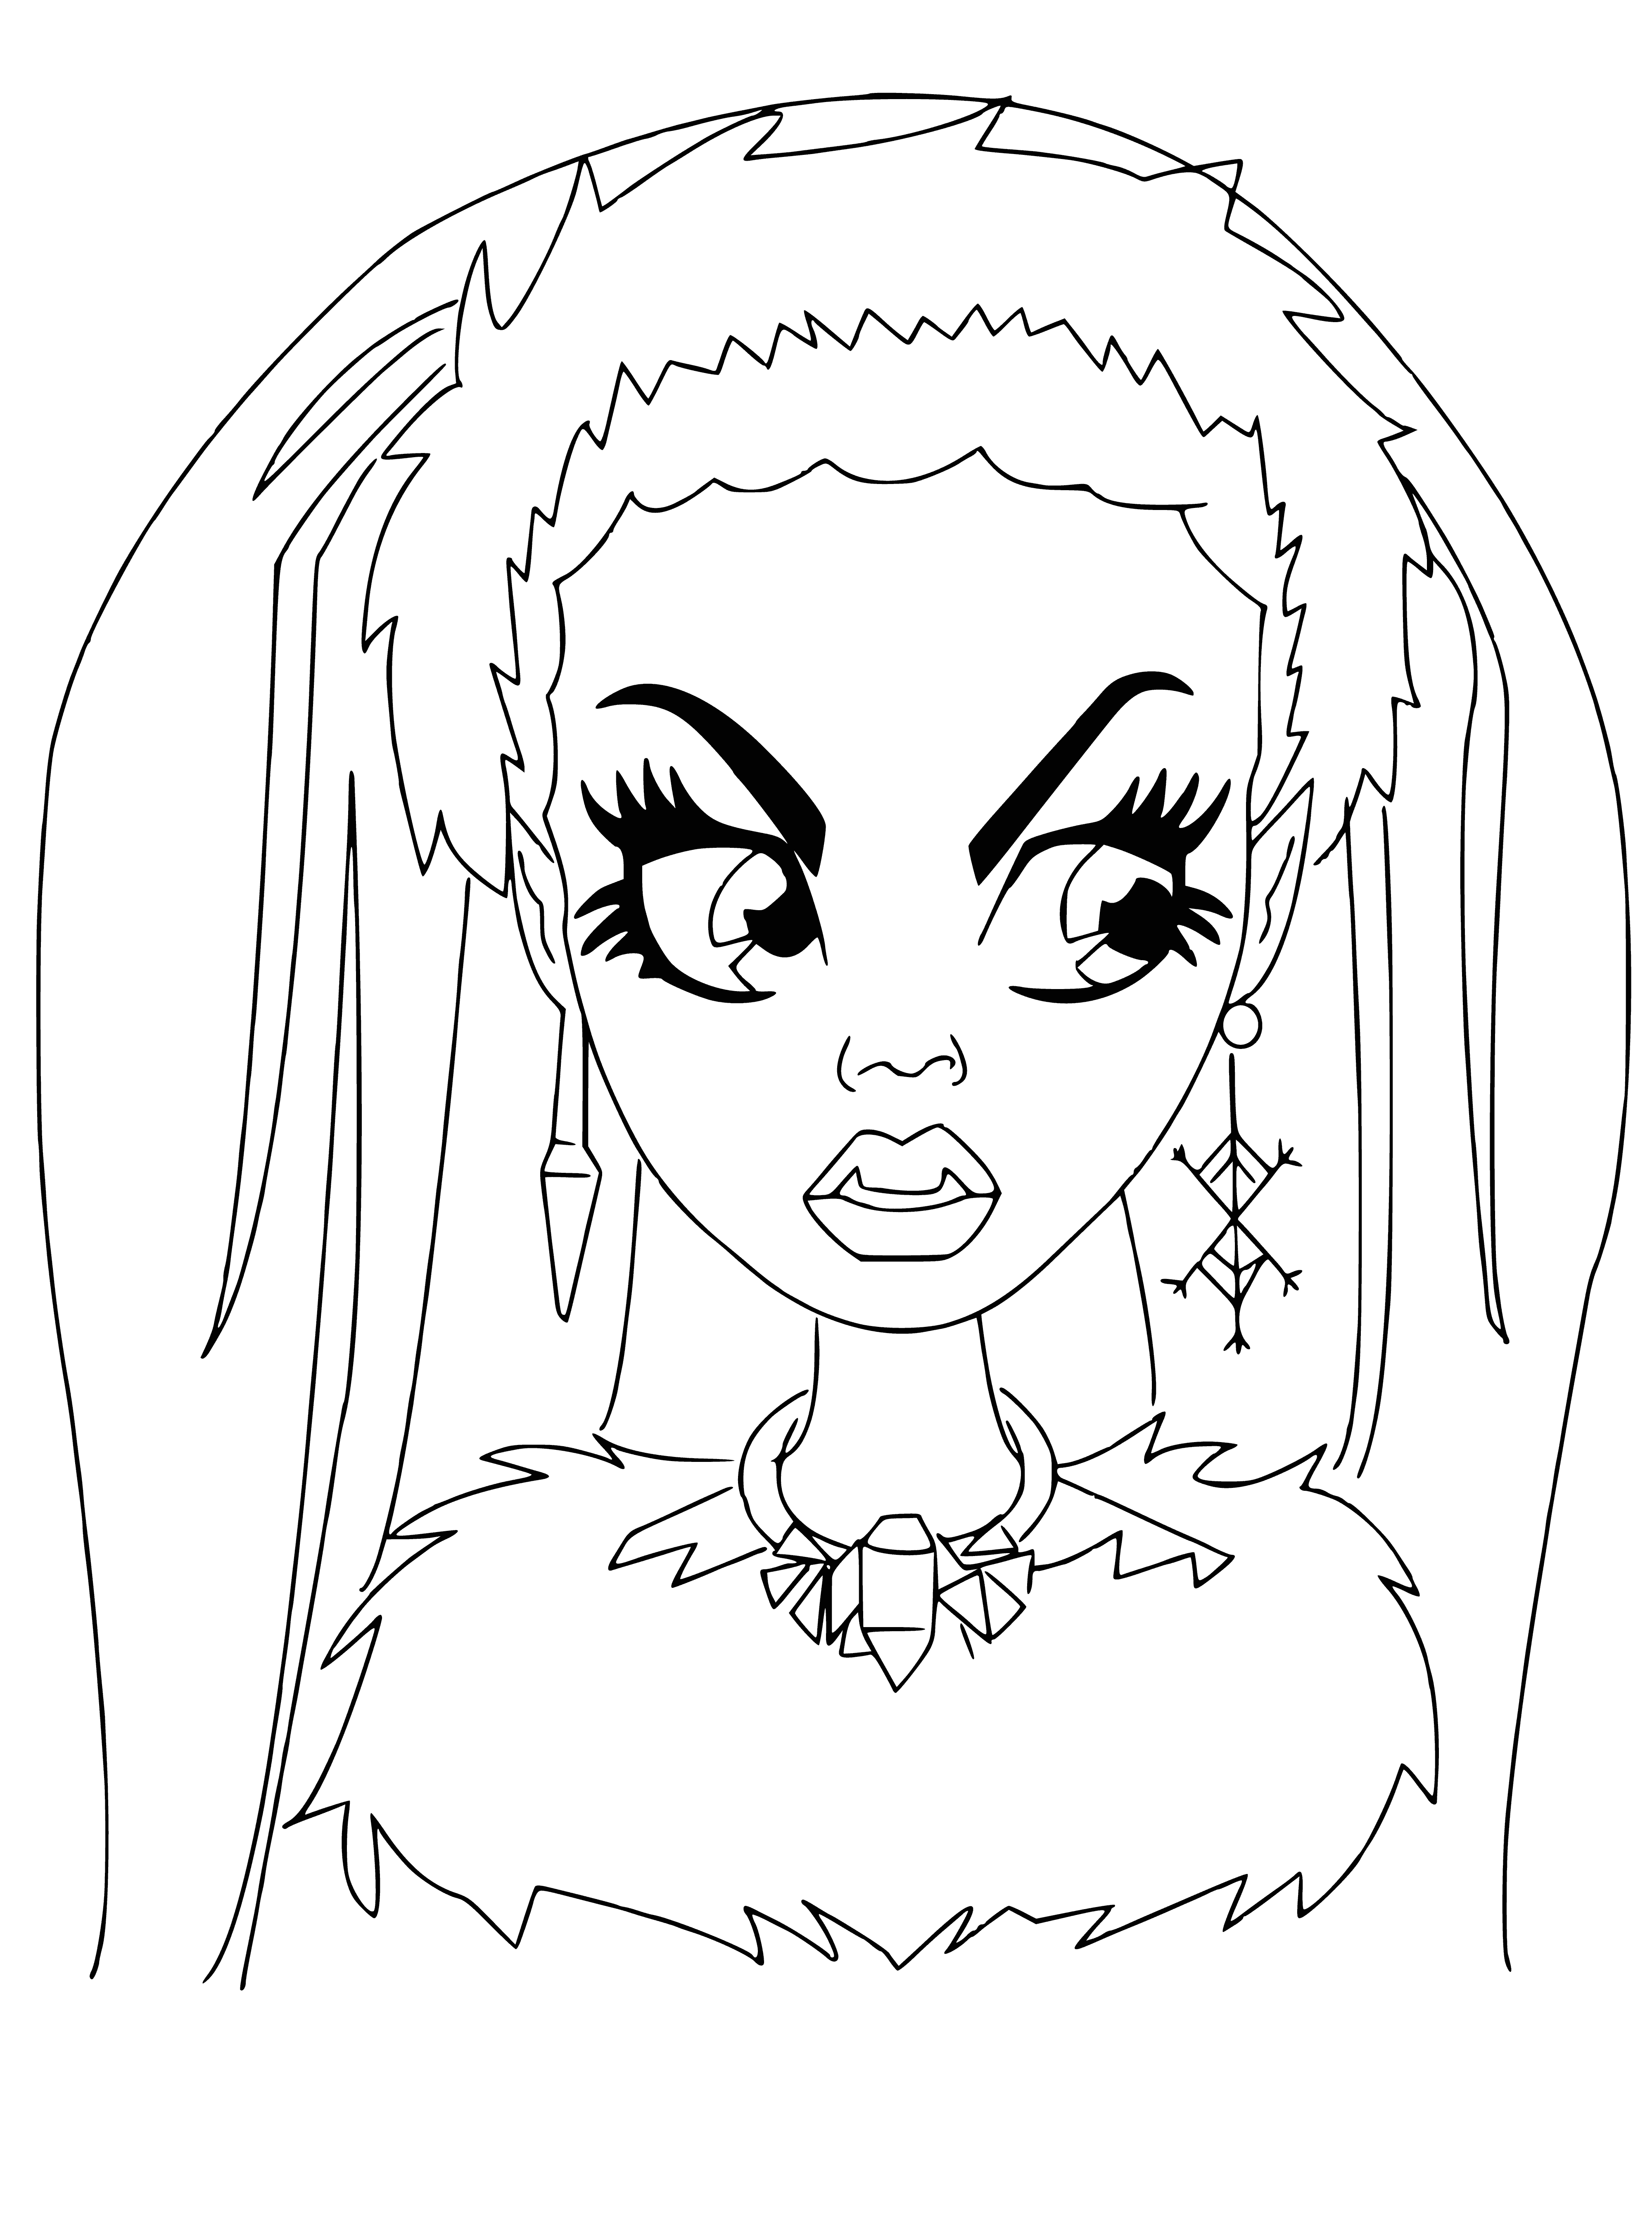 coloring page: Loyal and fashionable werewolf, Abby is a bit of a mystery at Monster High, often seen roaming the halls late at night.